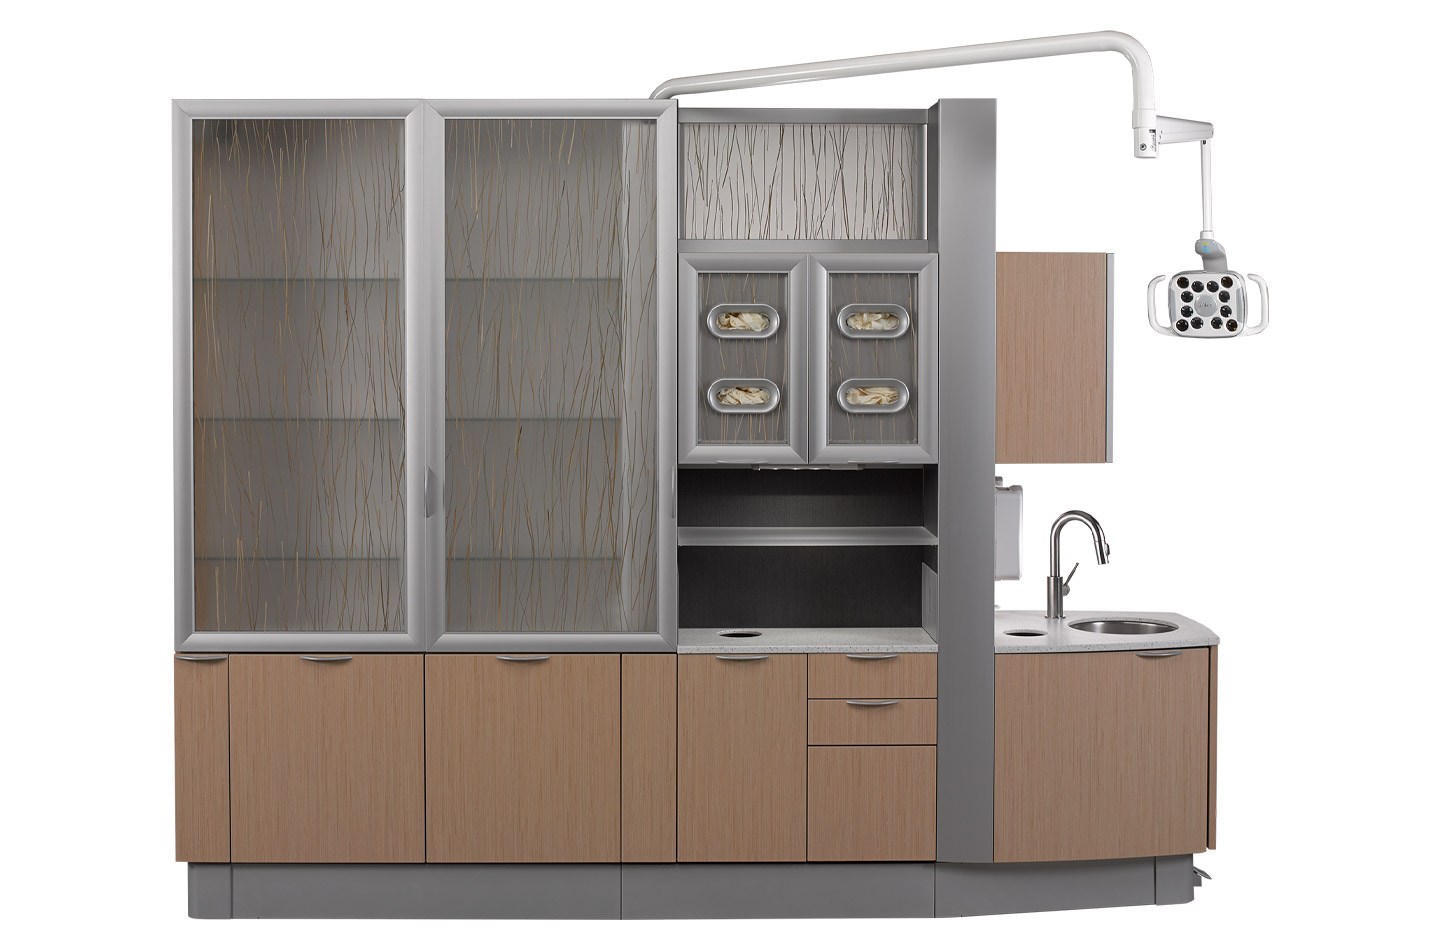 A-dec Inspire 592 central console side view with light colored wood and dental light